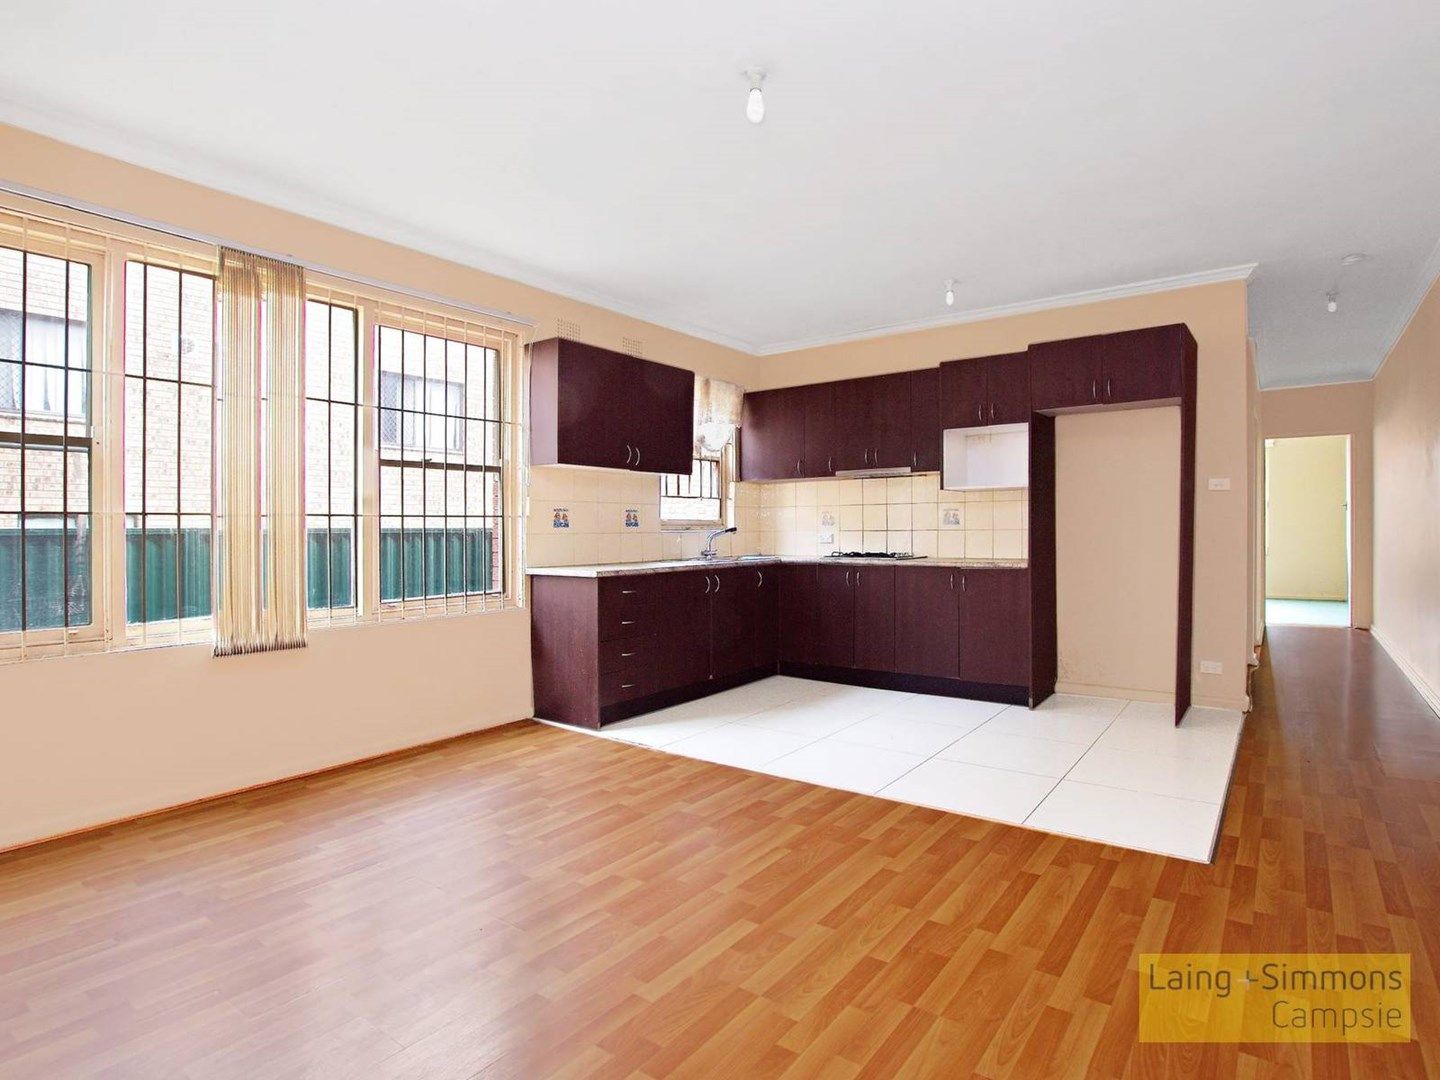 2 bedrooms Apartment / Unit / Flat in 2/17 St Clair Street BELMORE NSW, 2192